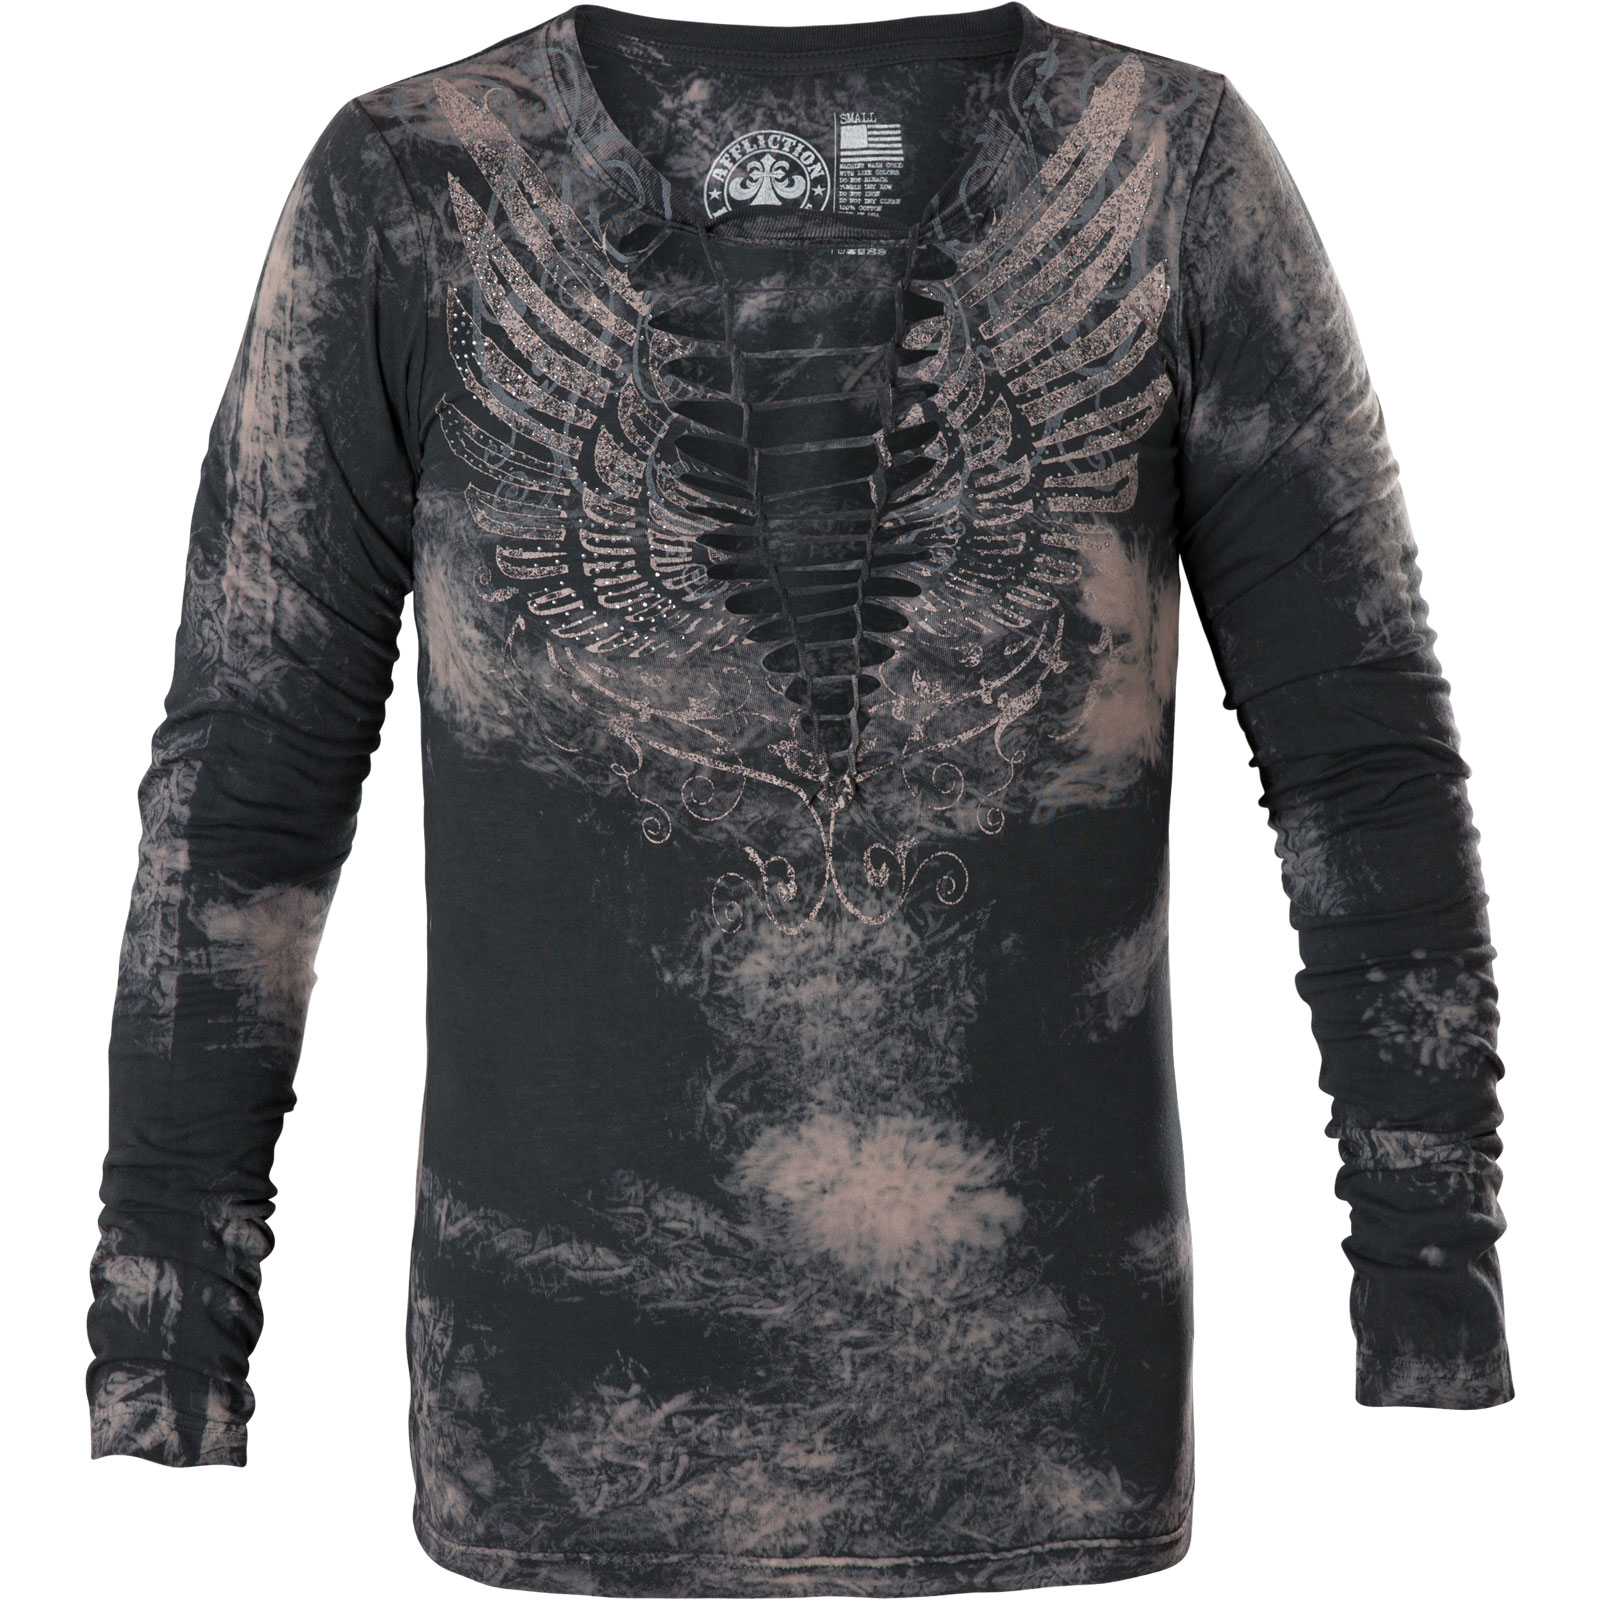 Affliction Stamped Wings Sweater with a rose print